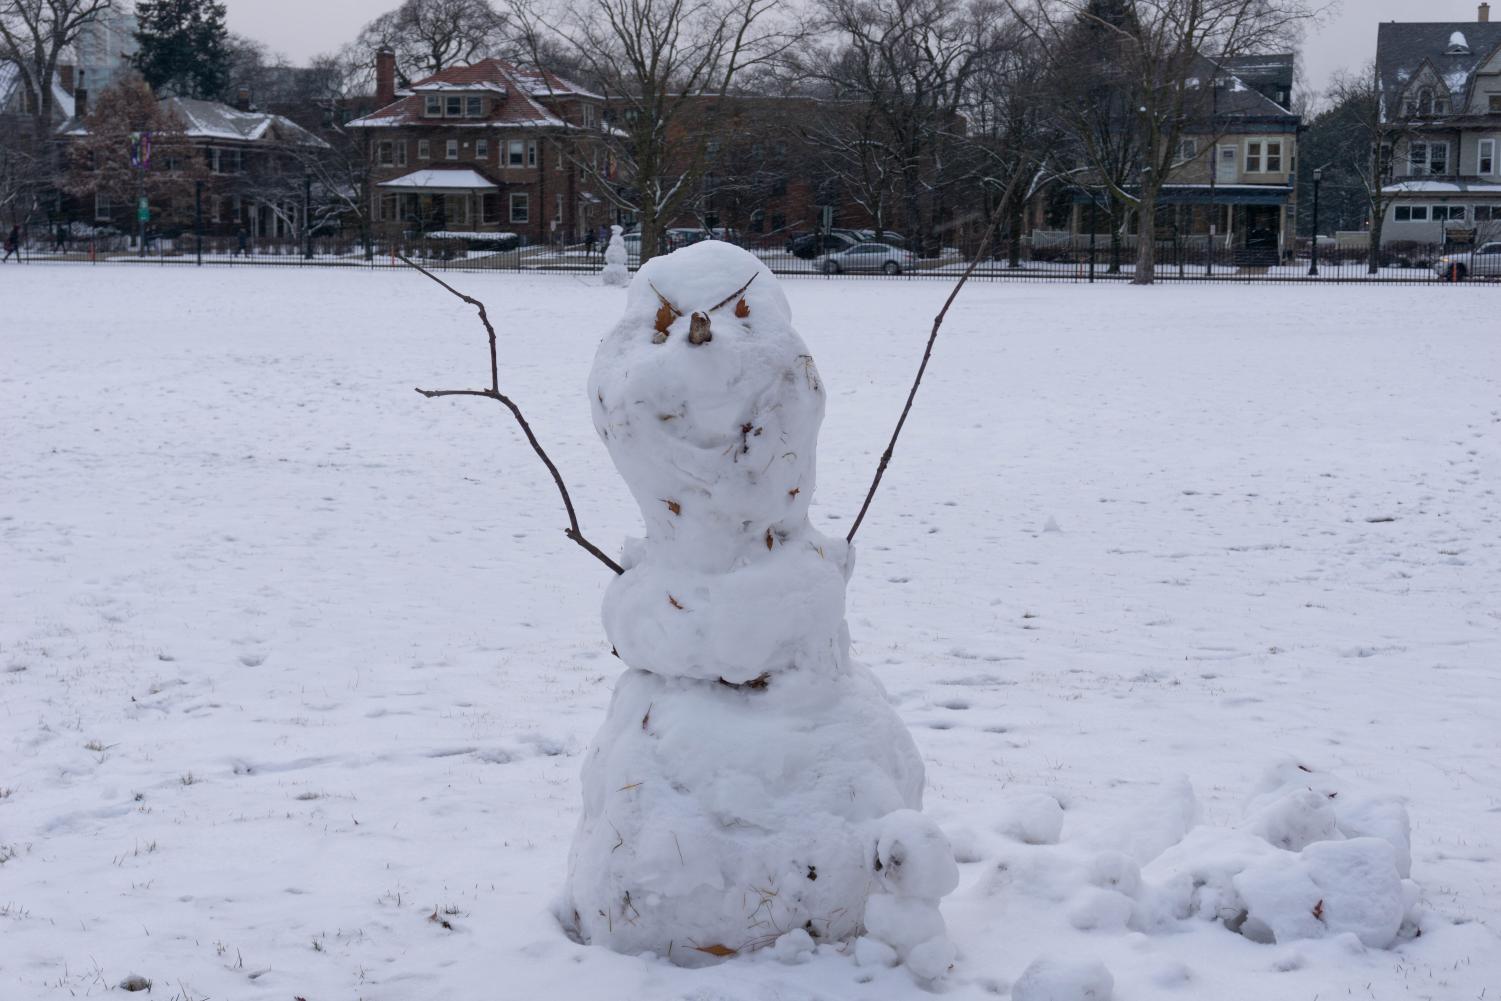 A snowman with sticks for arms and leaves for eyes.